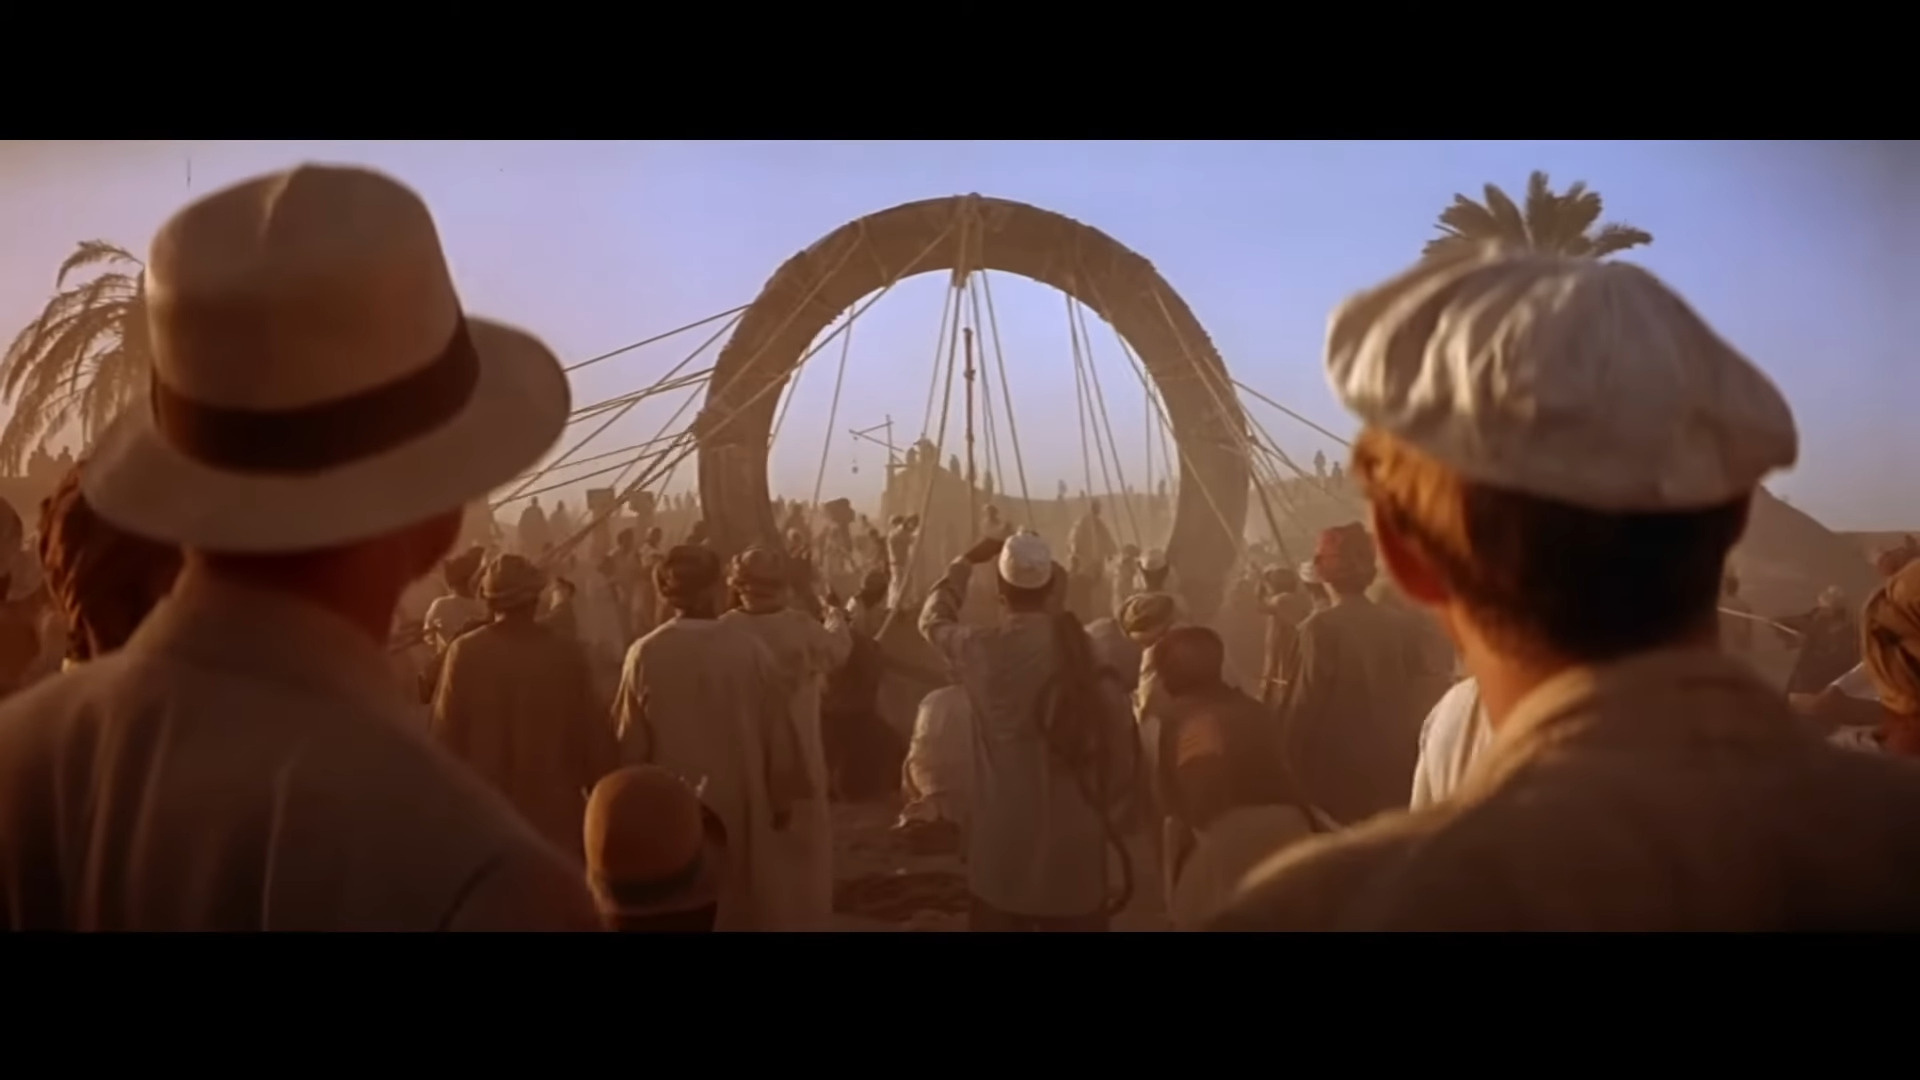 A Stargate is discovered in the deserts of Egypt in Stargate (1994), MGM